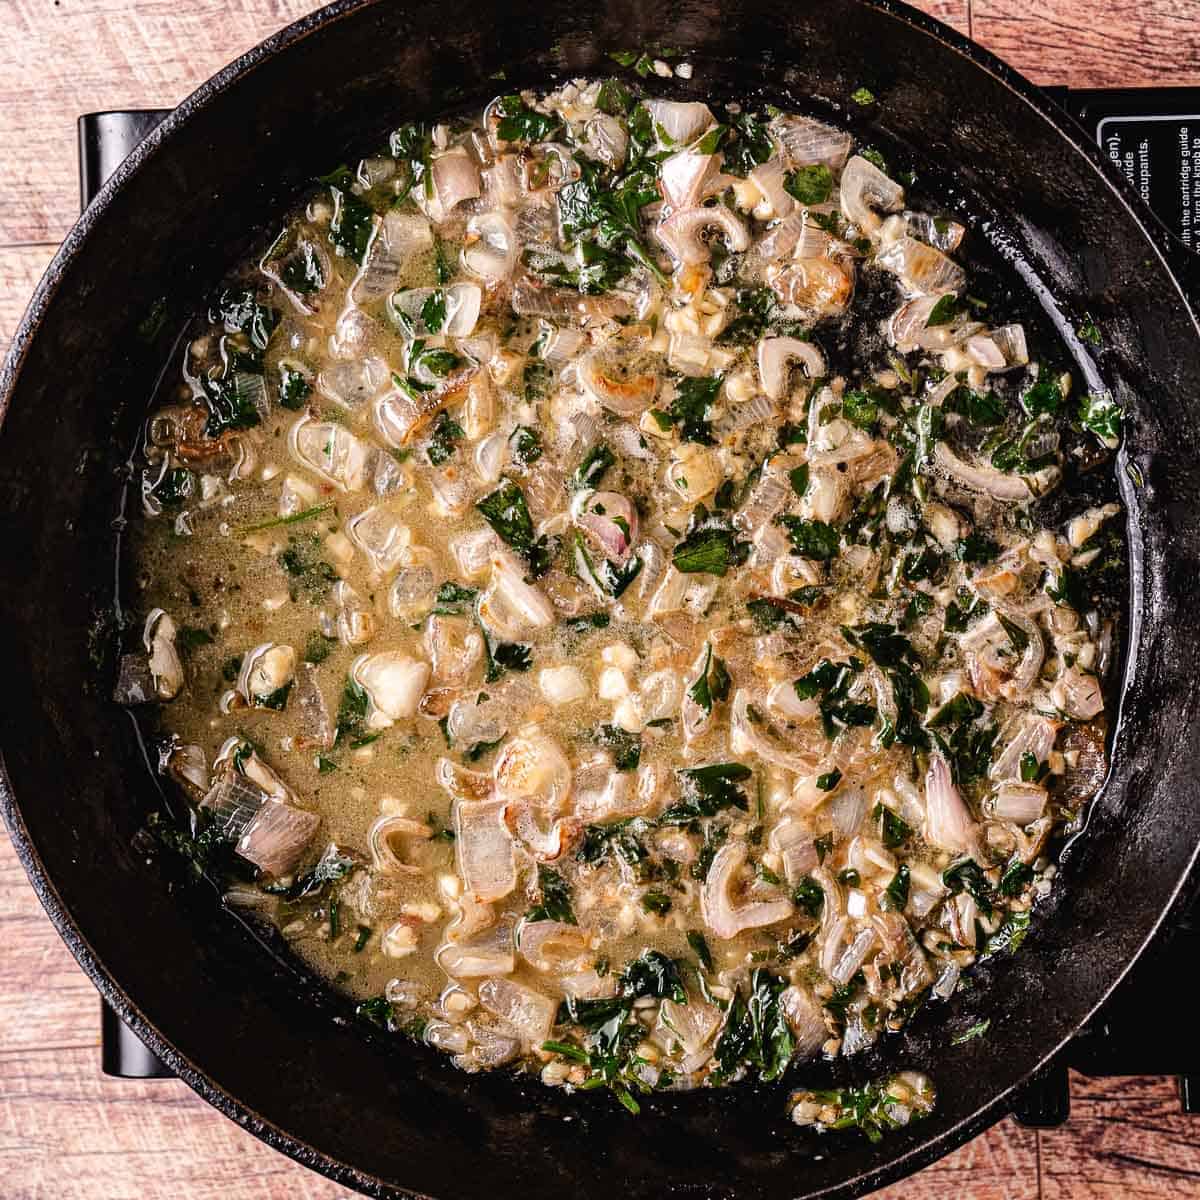 garlic, shallots, and parsley cooking in oil.